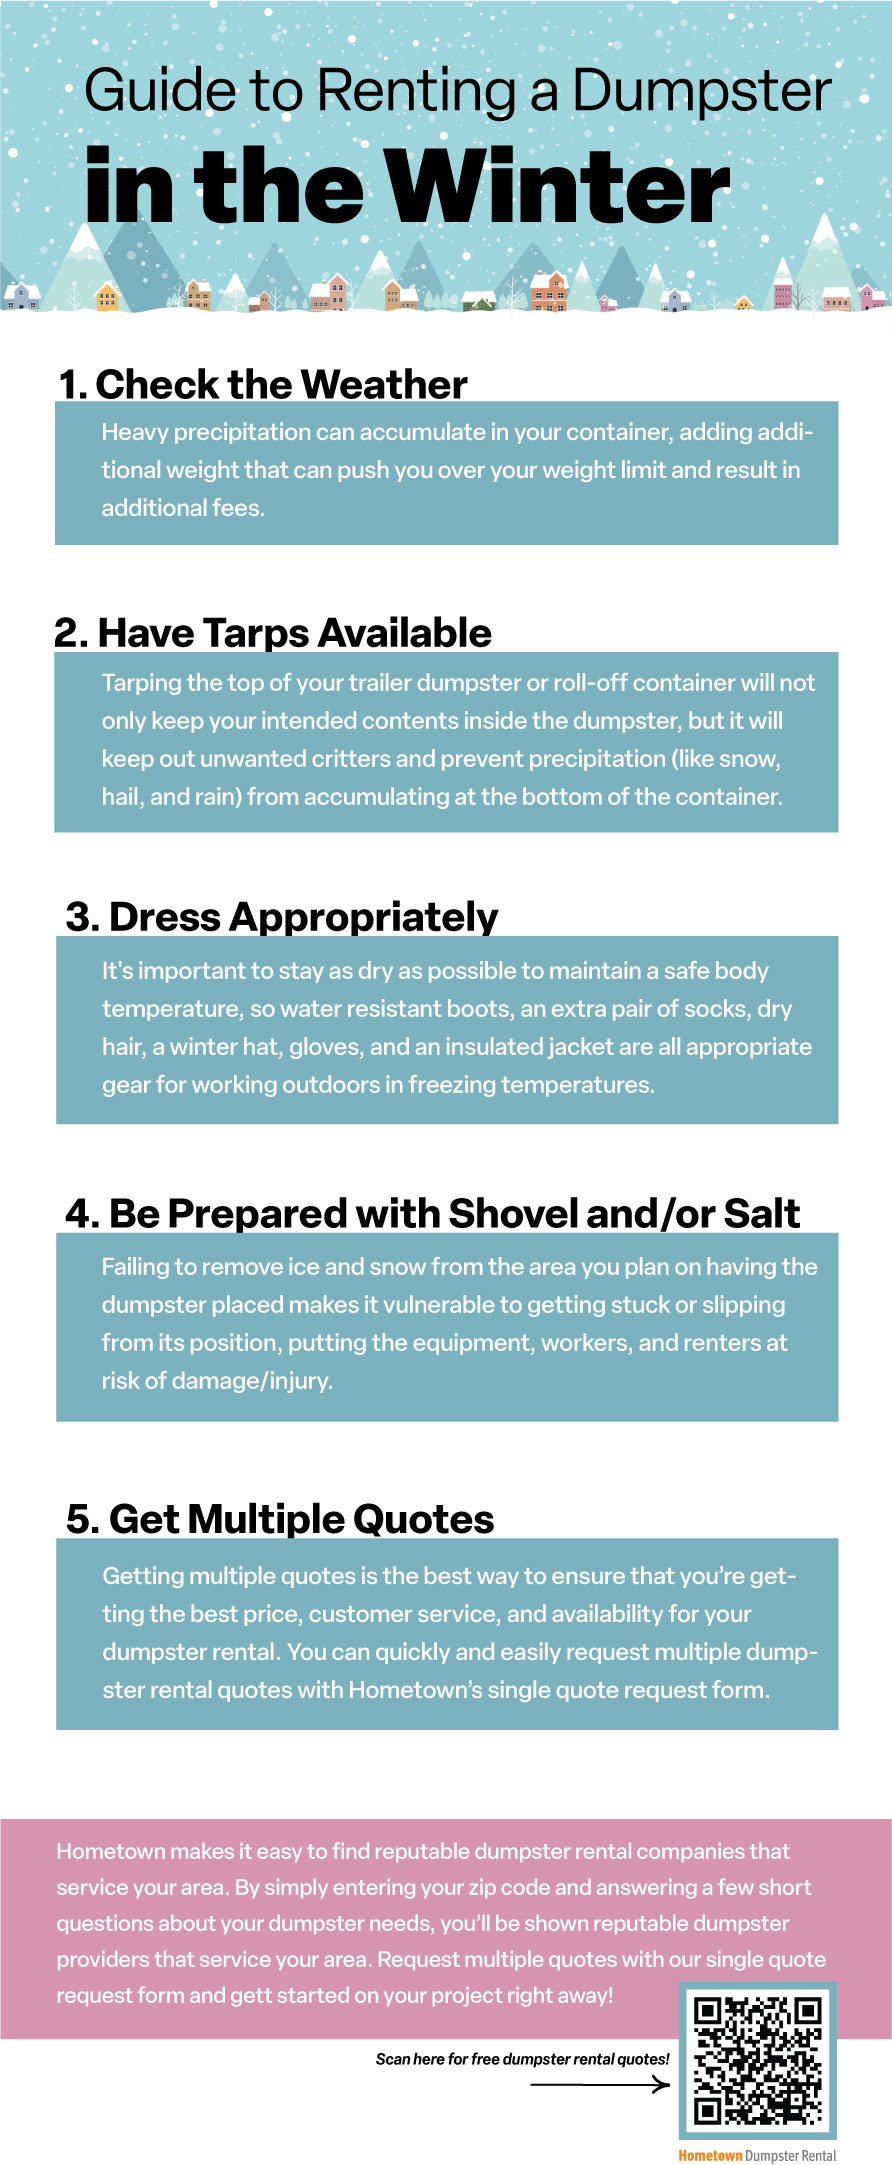 Guide to Renting a Dumpster in the Winter Infographic